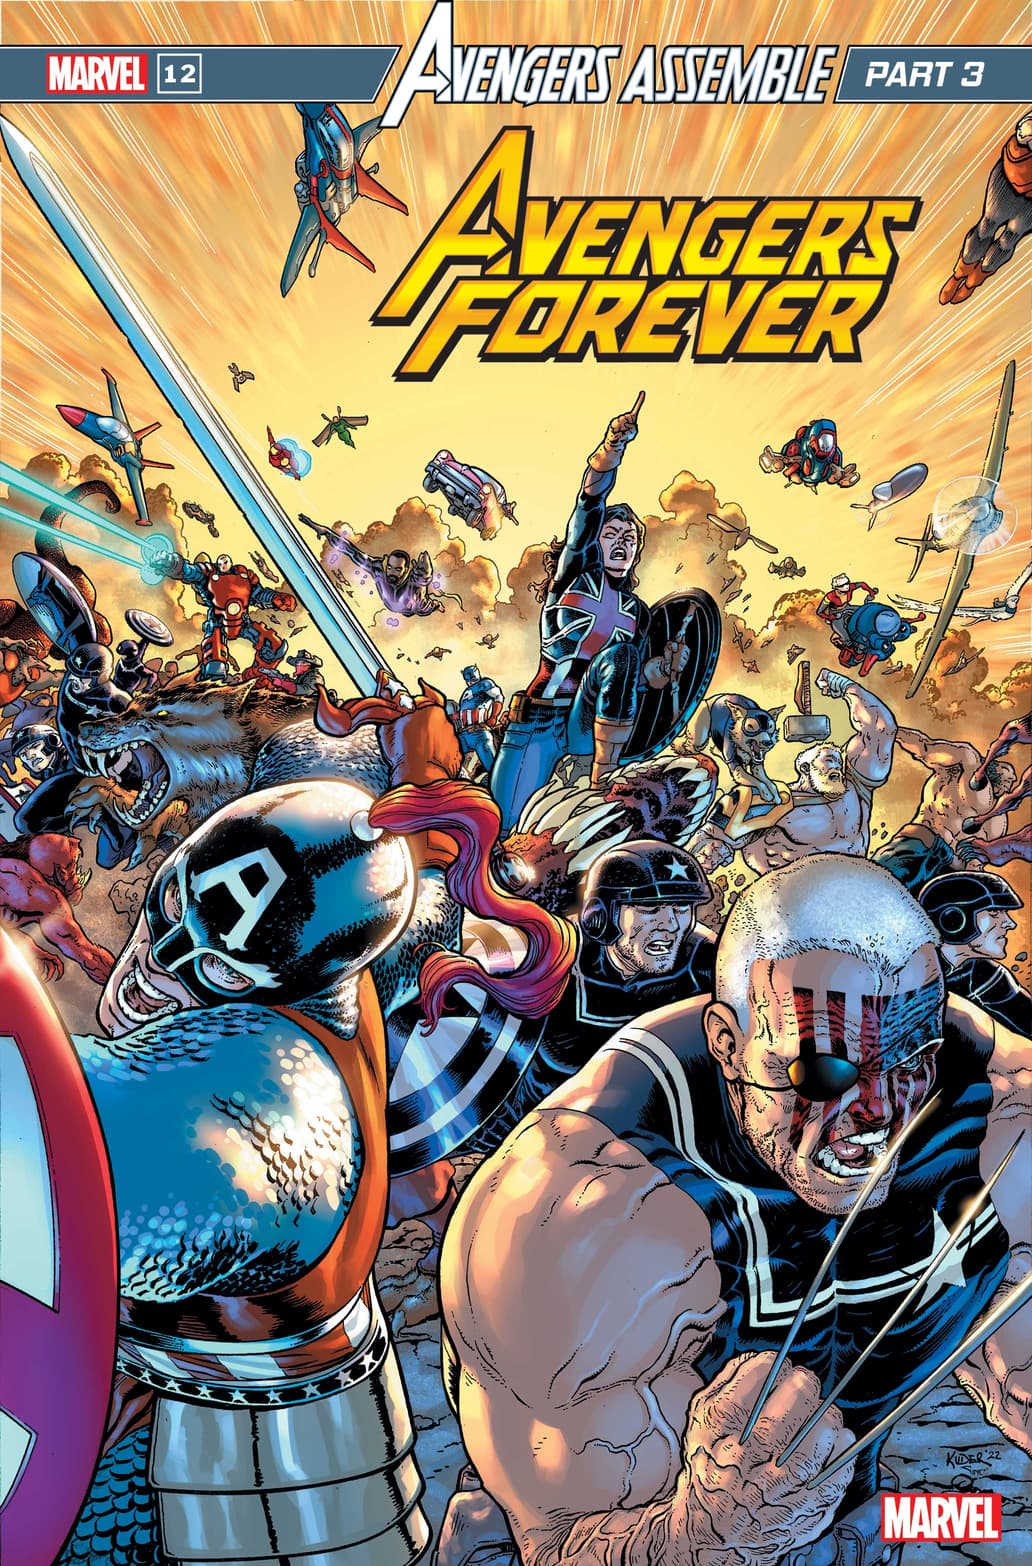 Avengers Assemble' Brings Jason Aaron's 'Avengers' Era to an End with an  Extraordinary Saga across Space and Time | Marvel